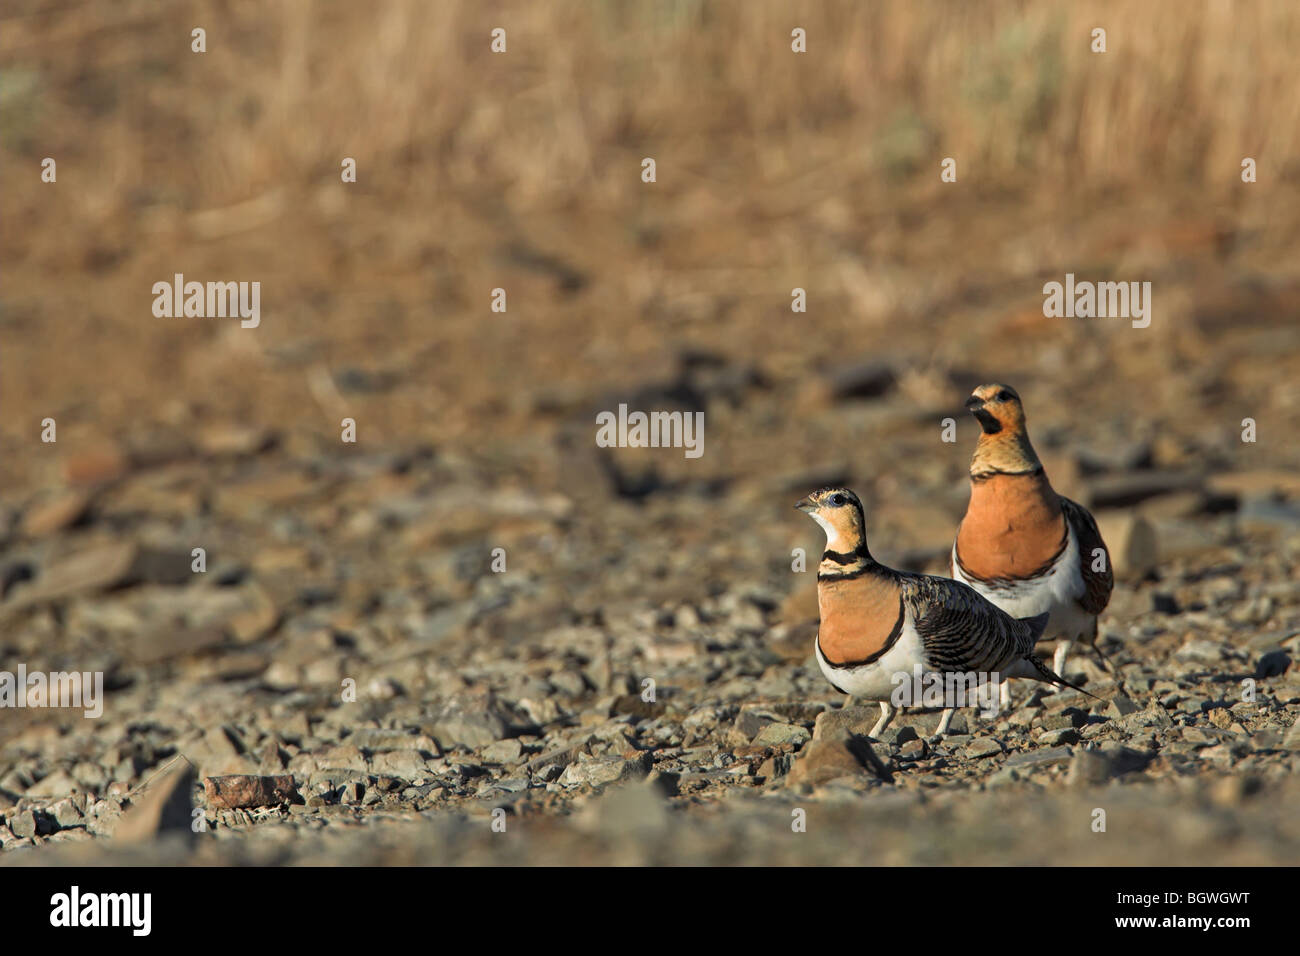 Pin-tailed Sandgrouse Pterocles alchata Foto Stock